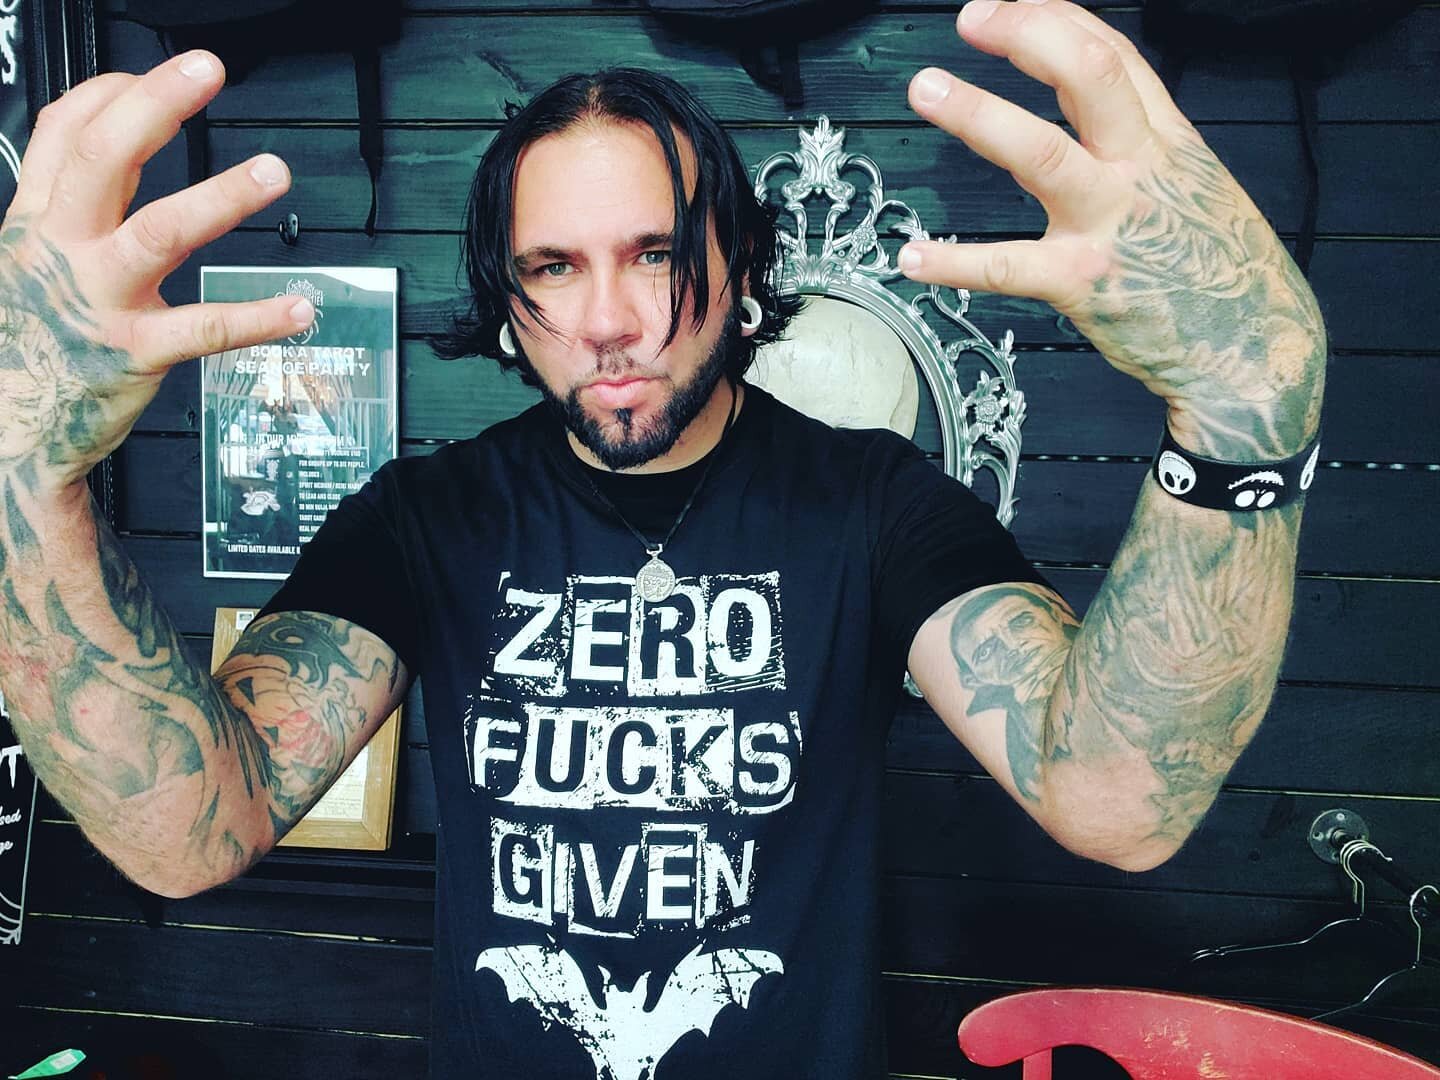 &quot;Zero fucks Given Tee&quot; From Dark and Dreary Clothing in stock Small-4xl Get em while they last🦇

We are open Noon-6pm today also available at www.SkellingtonCuriosities.com